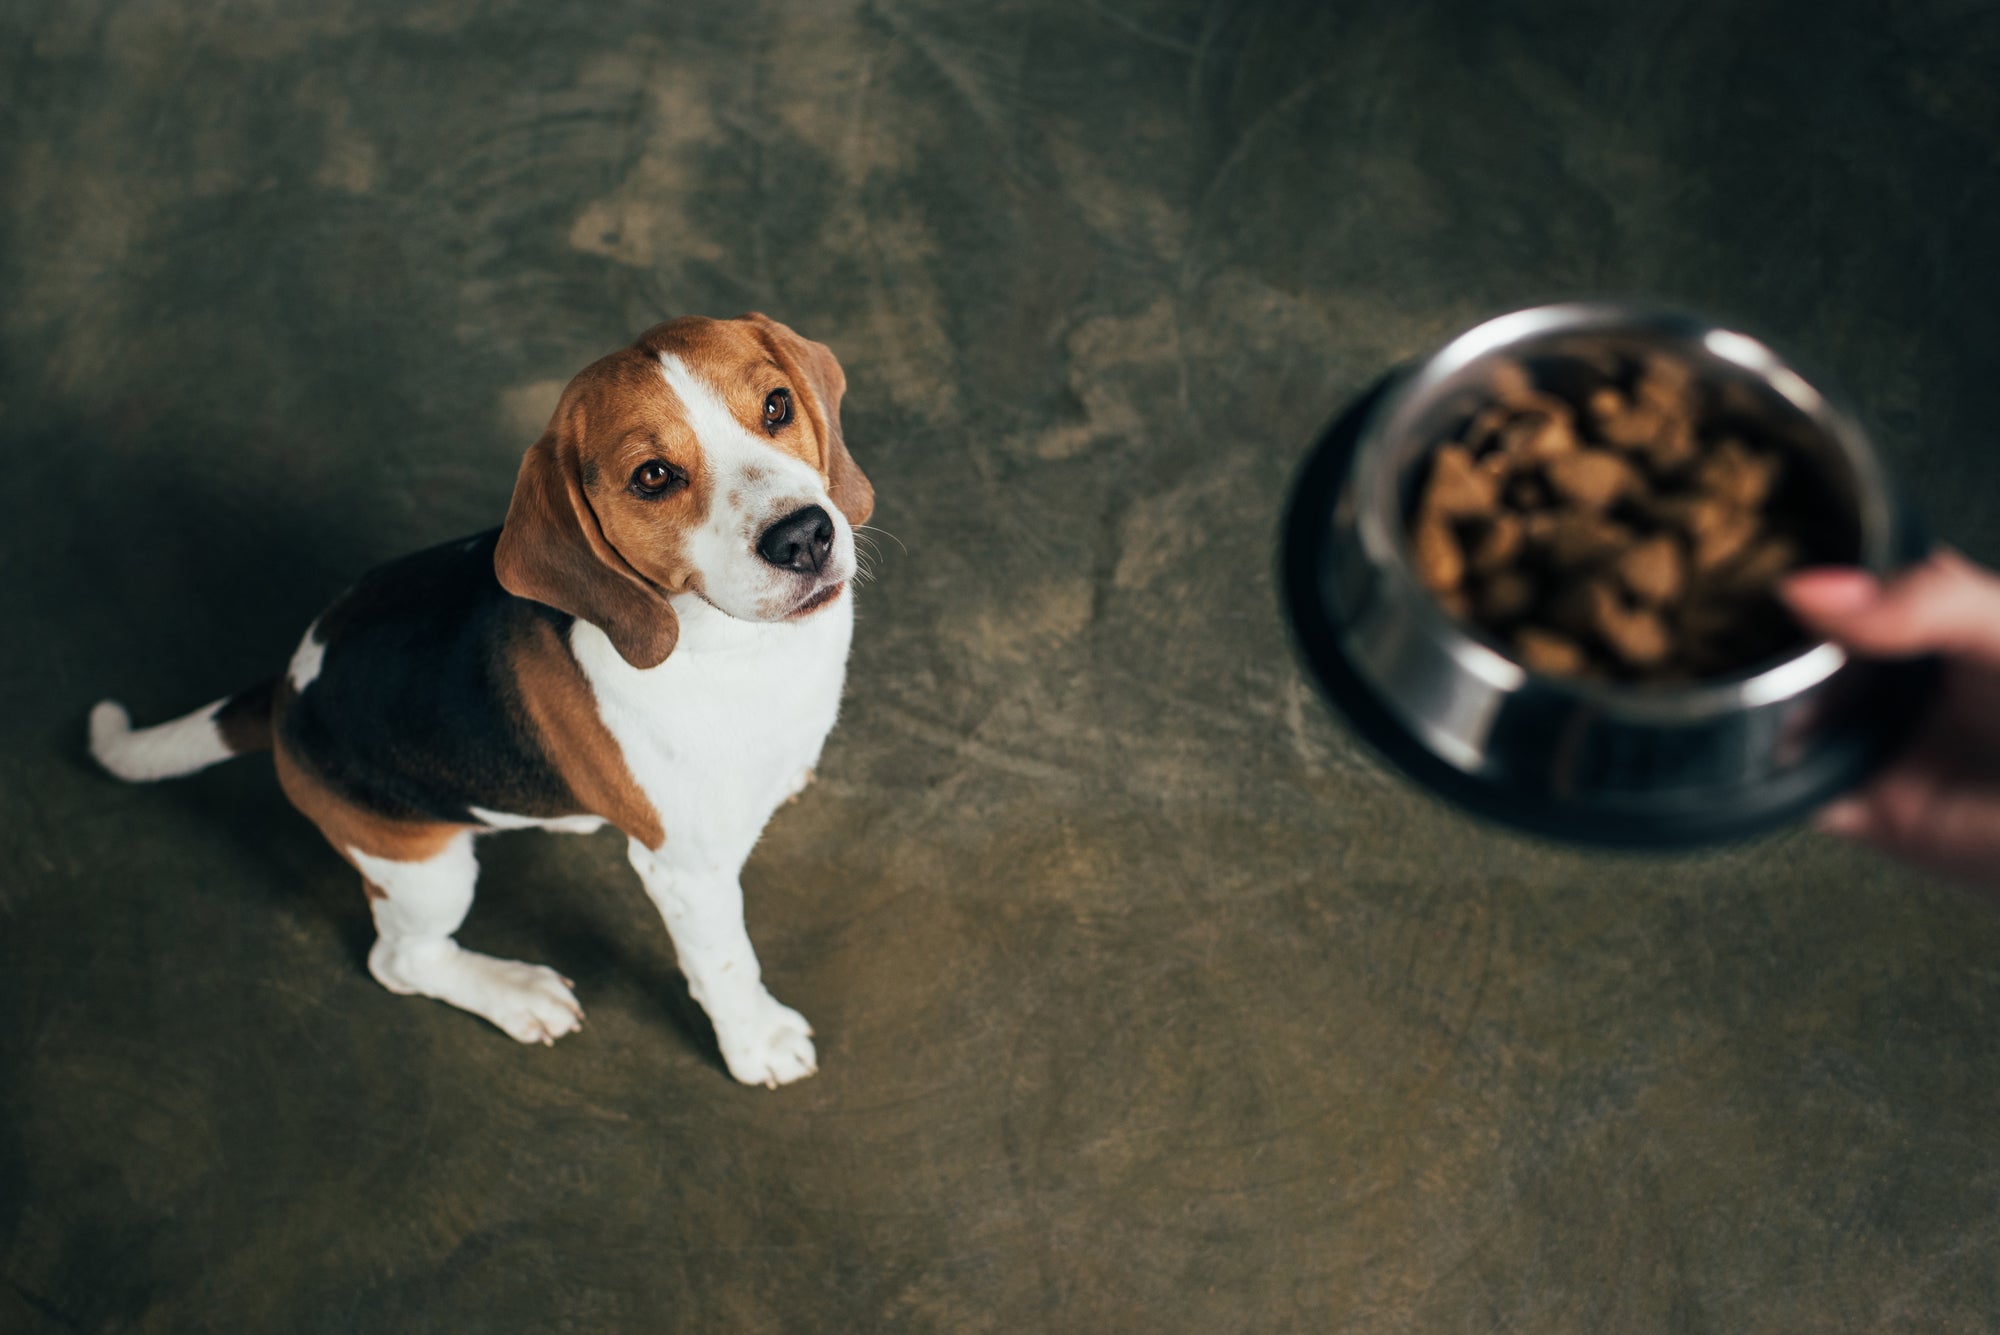 Wet vs dry dog food– Which is best?